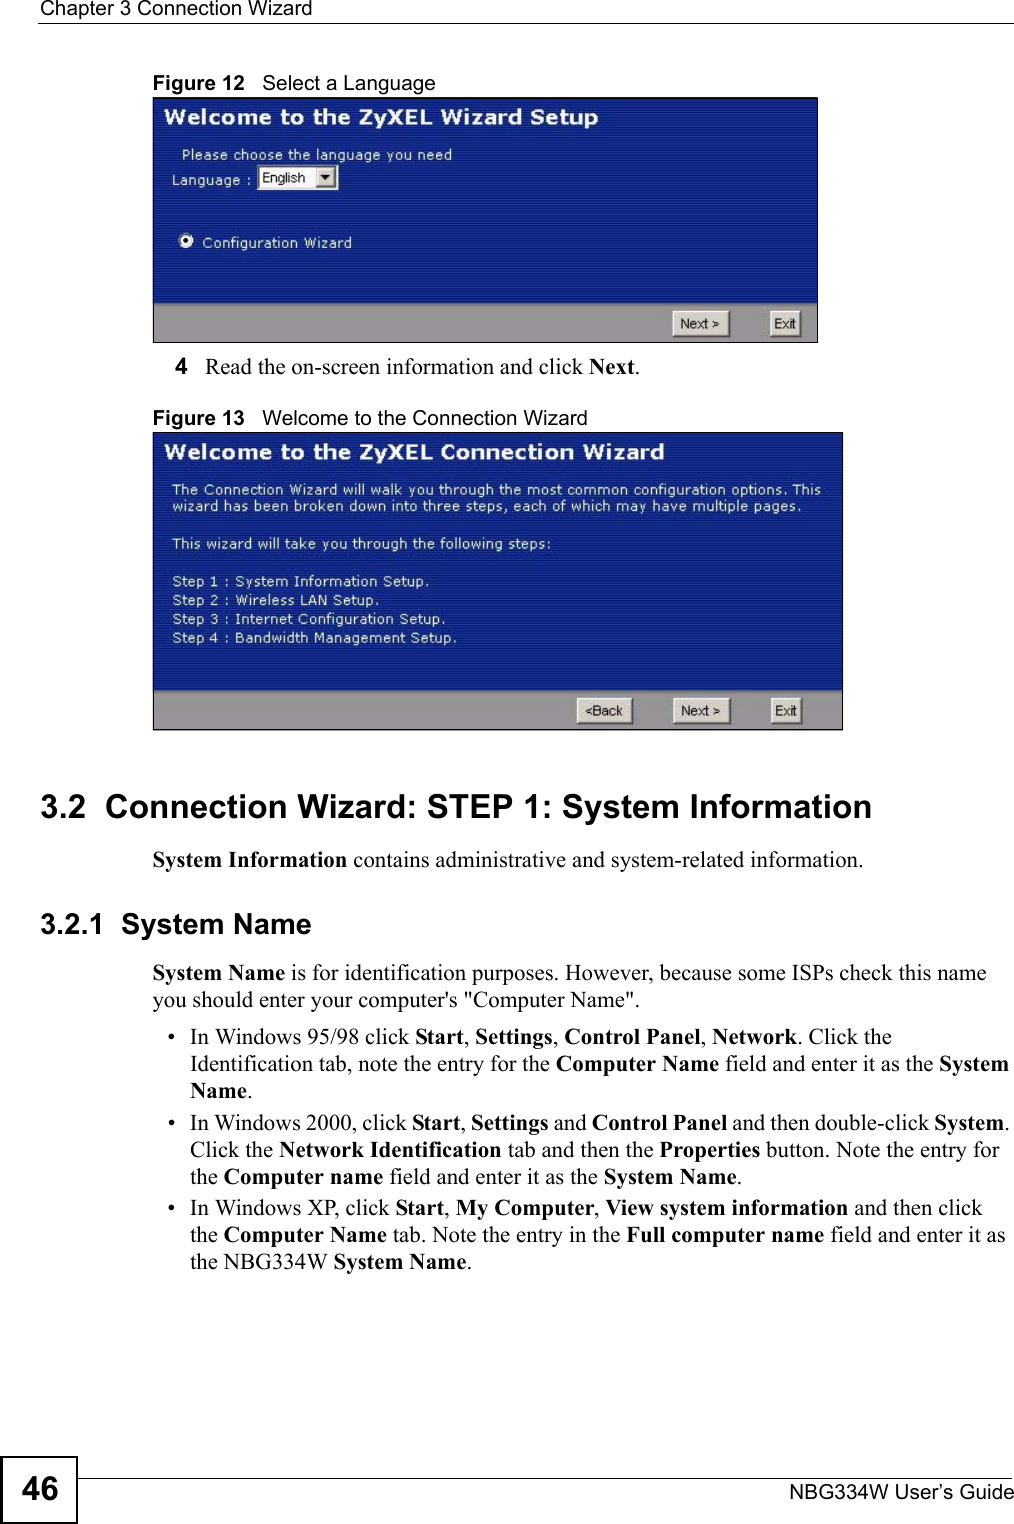 Chapter 3 Connection WizardNBG334W User’s Guide46Figure 12   Select a Language4Read the on-screen information and click Next.Figure 13   Welcome to the Connection Wizard3.2  Connection Wizard: STEP 1: System InformationSystem Information contains administrative and system-related information.3.2.1  System NameSystem Name is for identification purposes. However, because some ISPs check this name you should enter your computer&apos;s &quot;Computer Name&quot;. • In Windows 95/98 click Start, Settings, Control Panel, Network. Click the Identification tab, note the entry for the Computer Name field and enter it as the System Name.• In Windows 2000, click Start, Settings and Control Panel and then double-click System. Click the Network Identification tab and then the Properties button. Note the entry for the Computer name field and enter it as the System Name.• In Windows XP, click Start, My Computer, View system information and then click the Computer Name tab. Note the entry in the Full computer name field and enter it as the NBG334W System Name.